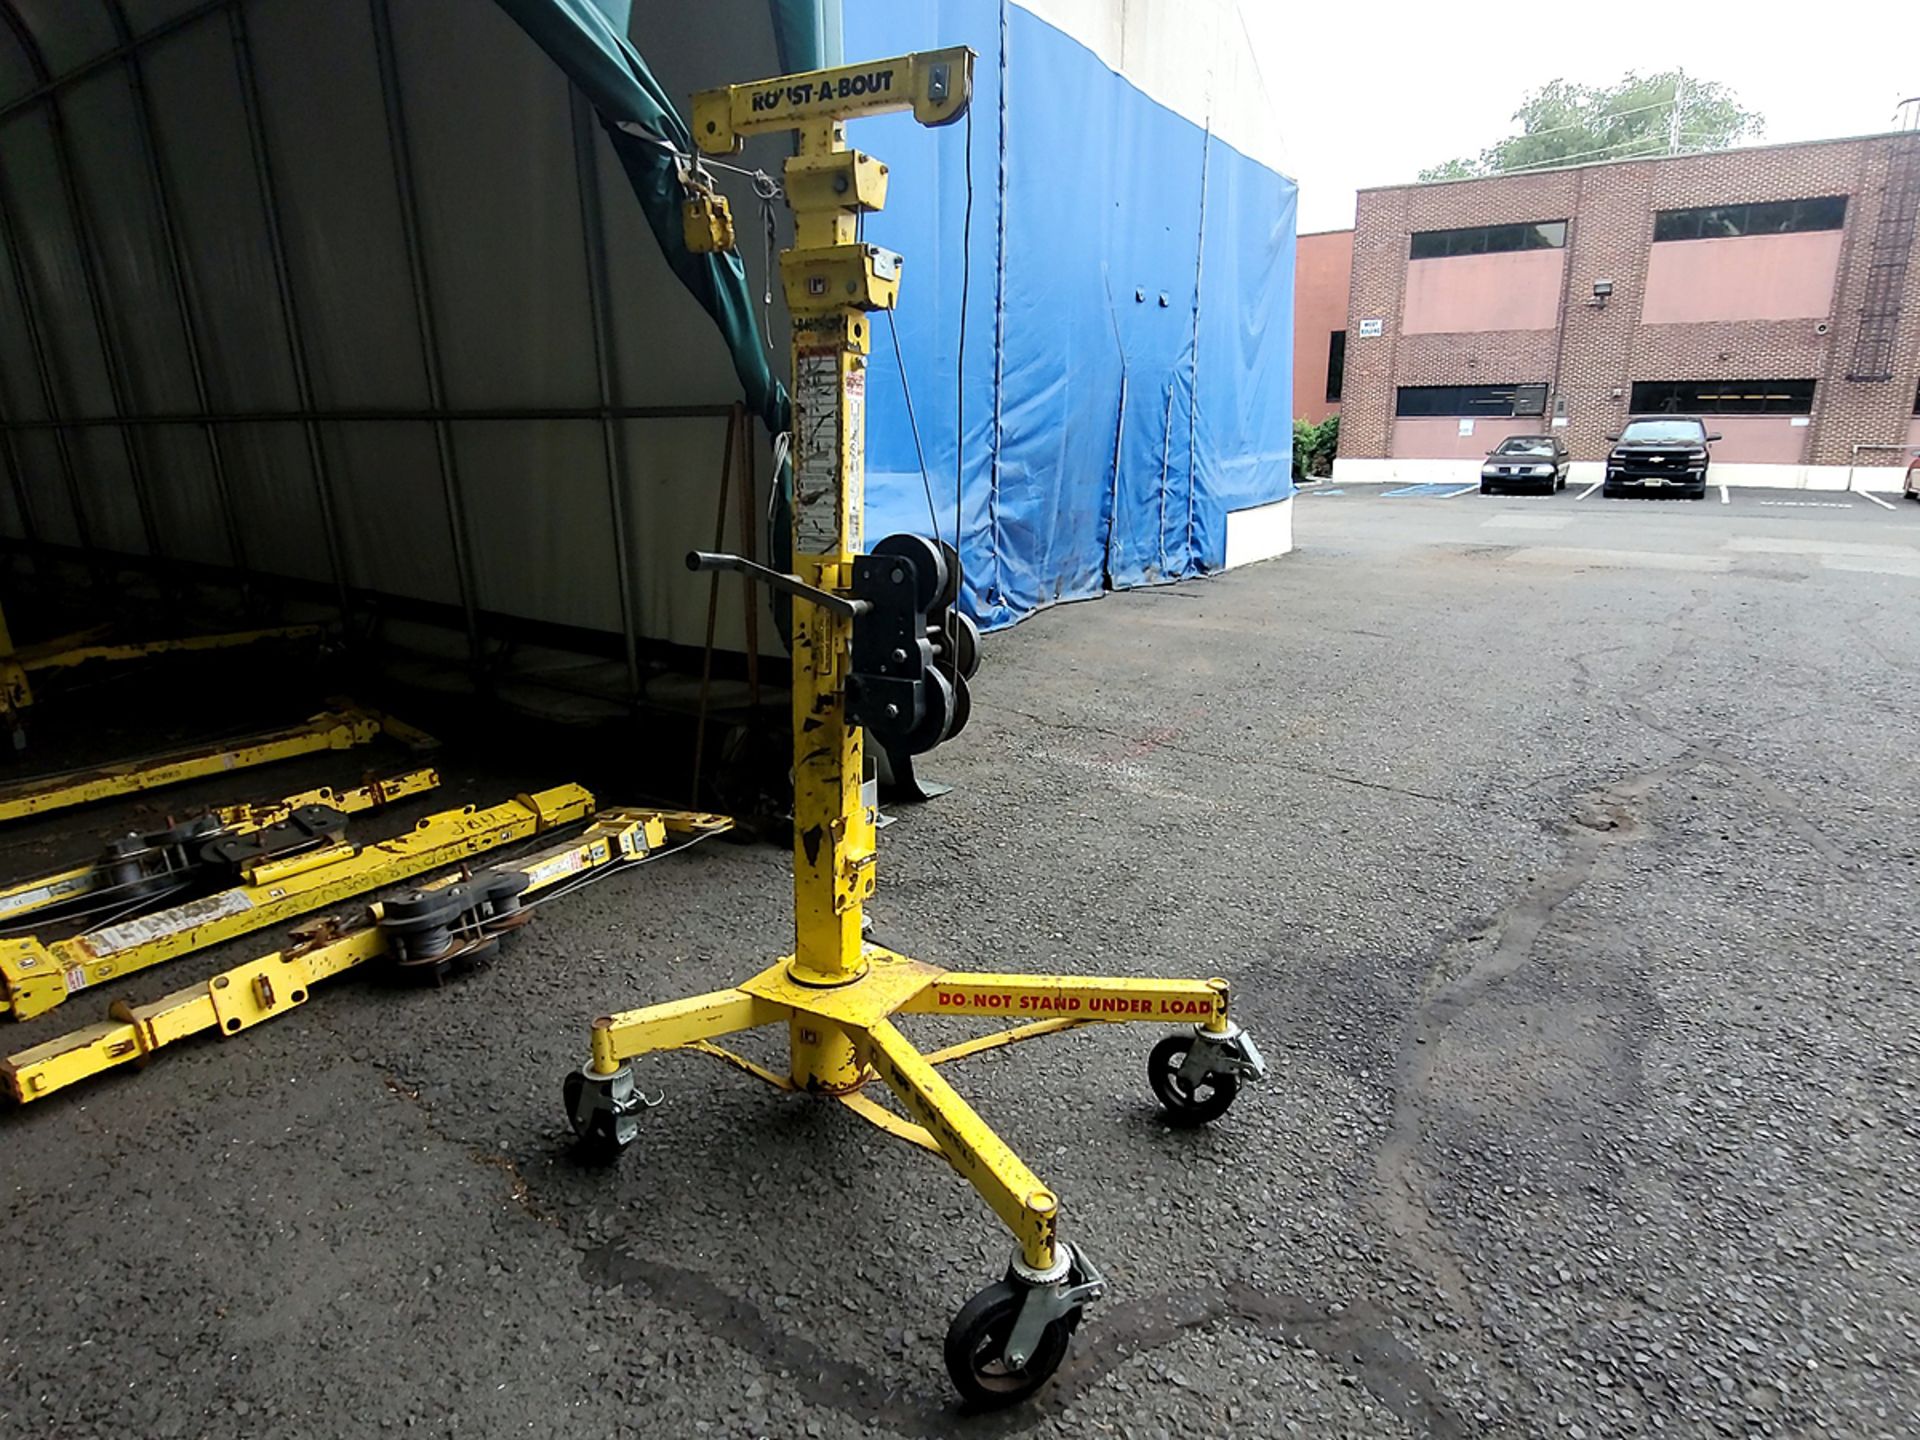 Sumner R-100/R-150 Roust A Bout Lift 1500lb Capacity and 15' Lift Height